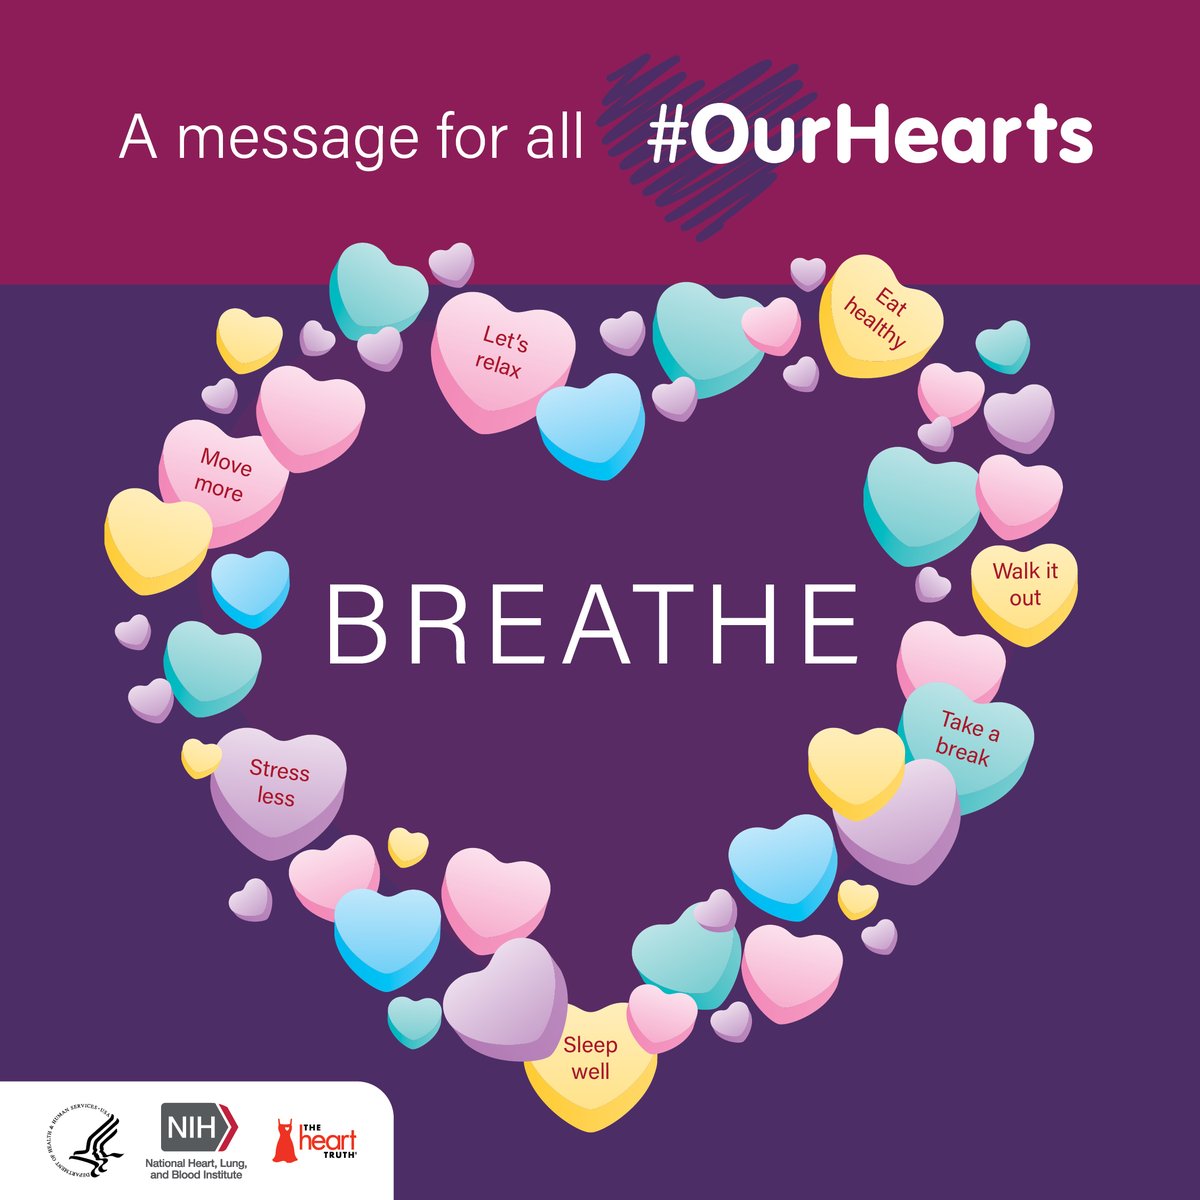 TheHeartTruth tweet picture